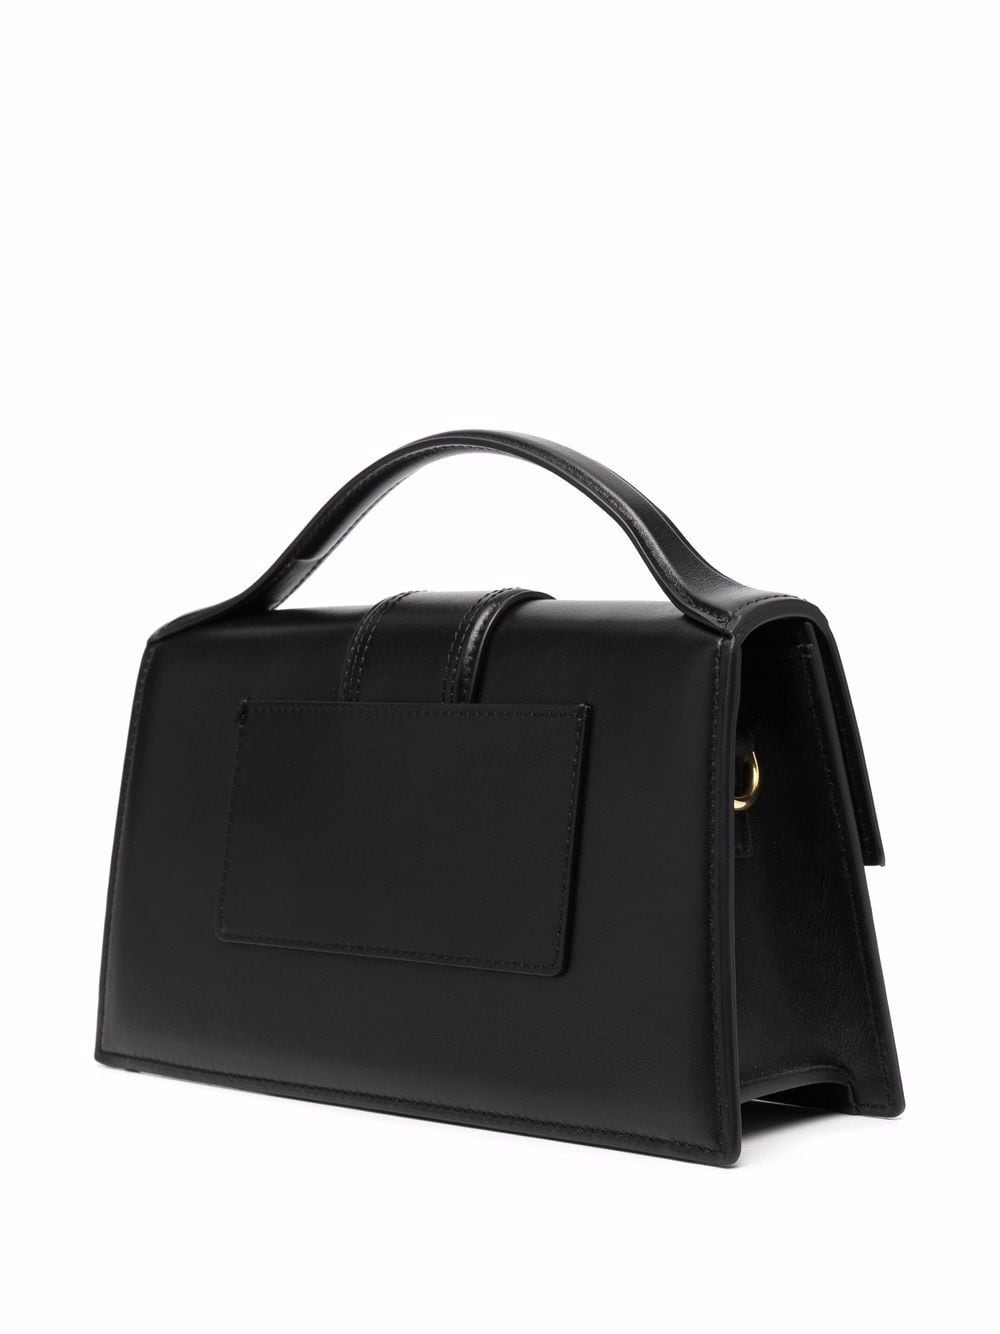 Le Grand Bambino Handbag in leather with adjustable shoulder strap